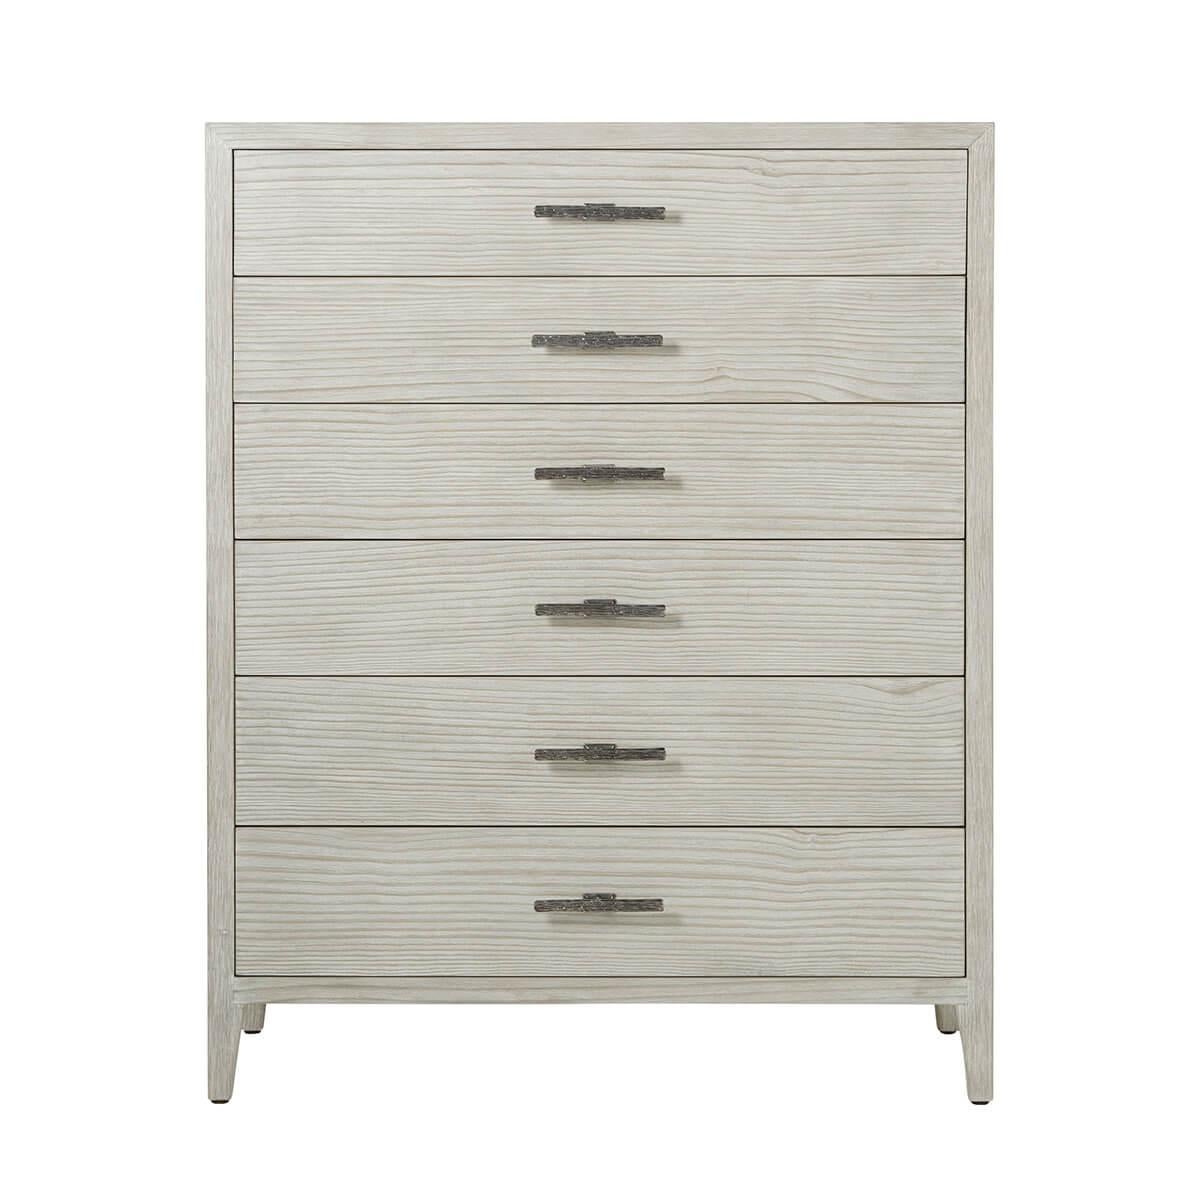 A modern take on a classic silhouette, the tall dresser is painted in the Sea Salt finish and accented with ribbed cast hardware in a dark sterling finish, with six soft closing drawers and raised on tapered legs.

Dimensions: 44